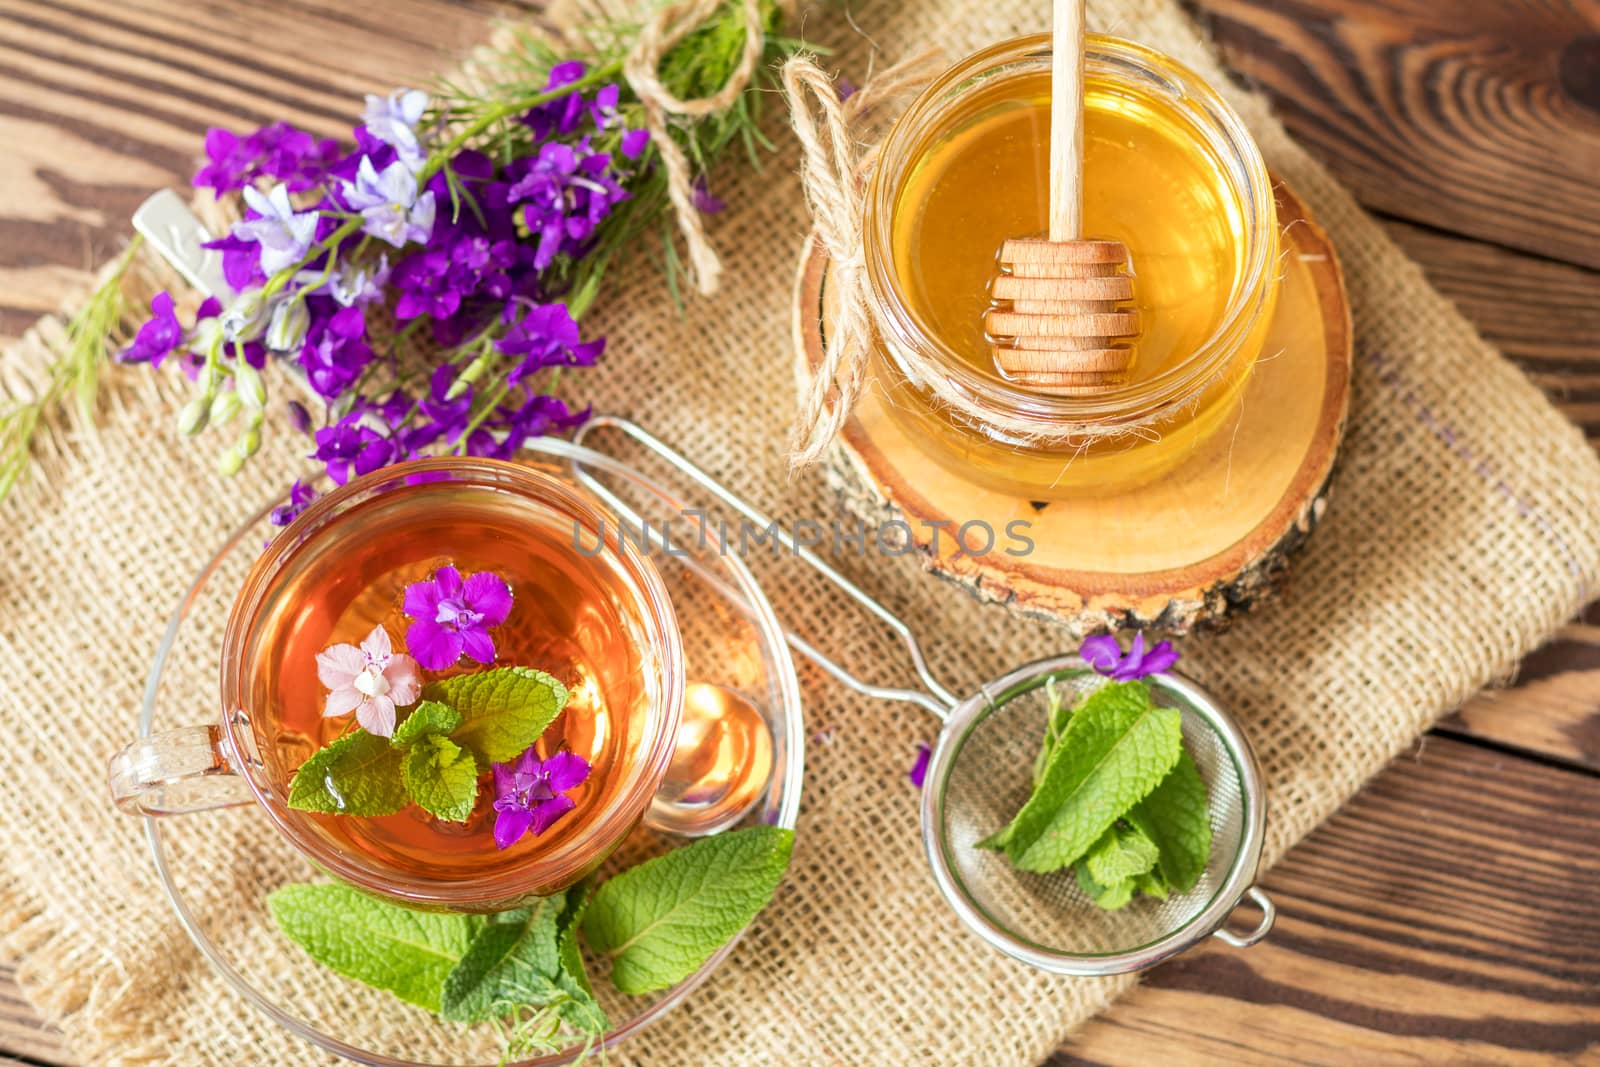 Glass cup of summer herbal tea with fresh mint and field larkspur. Jar of honey. Wooden table. Shallow depth of field.